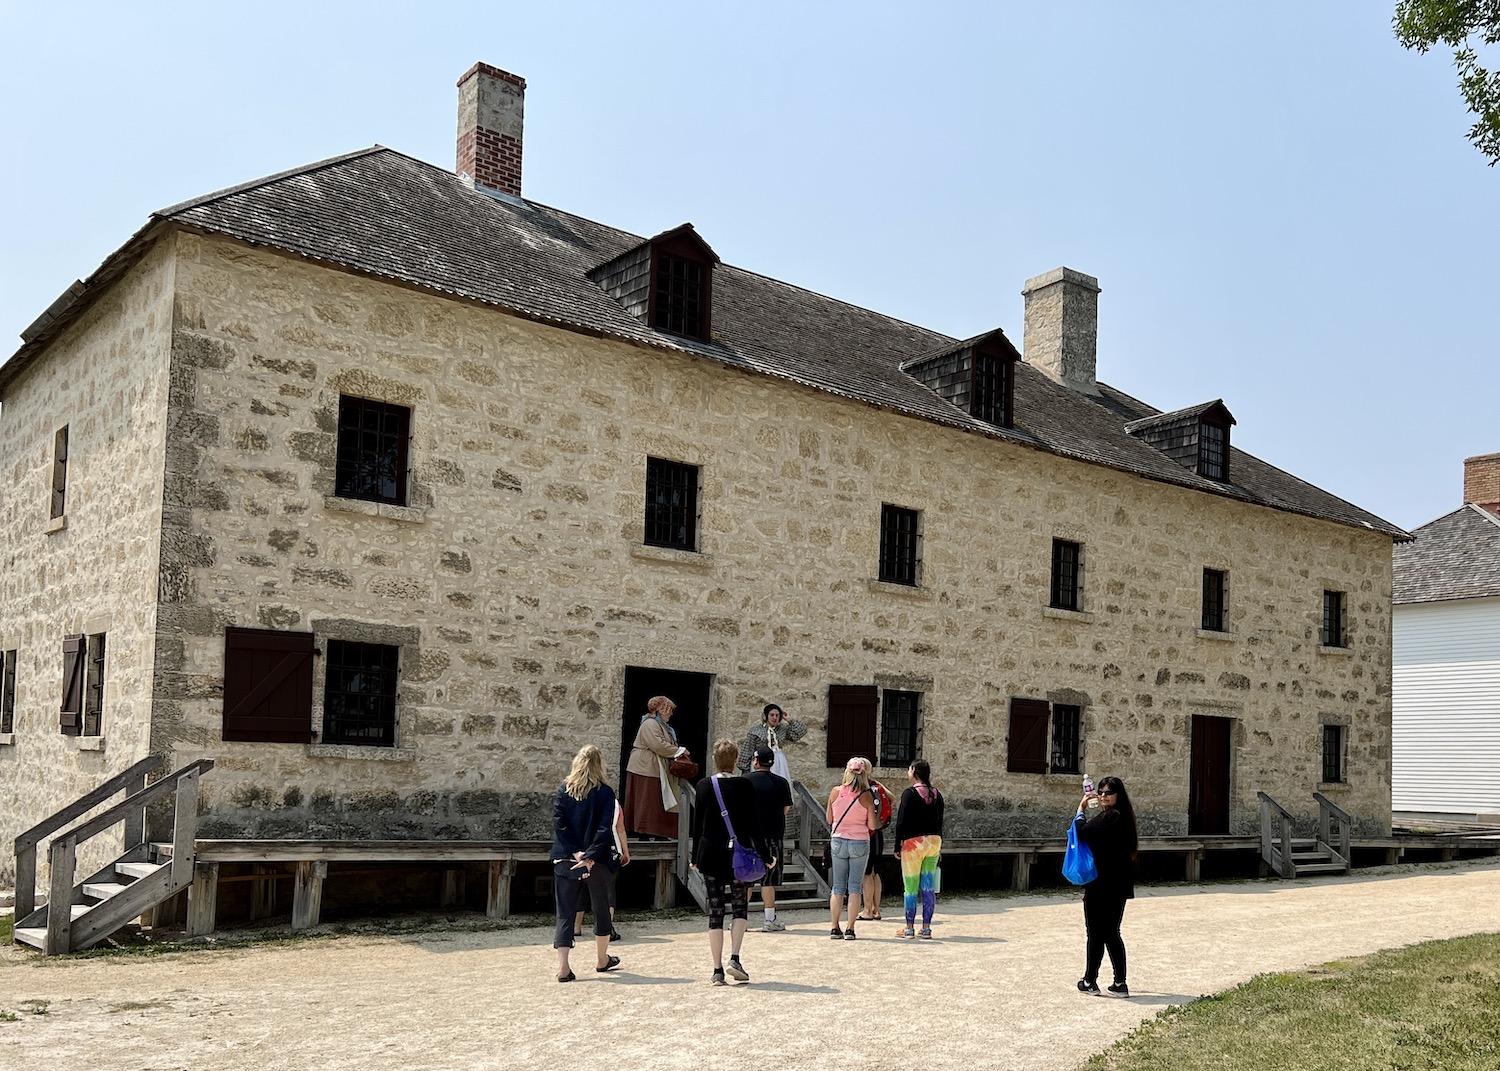 Inside Lower Fort Garry's stone walls is this stone fur loft/sales shop, built between 1830 and 1831.